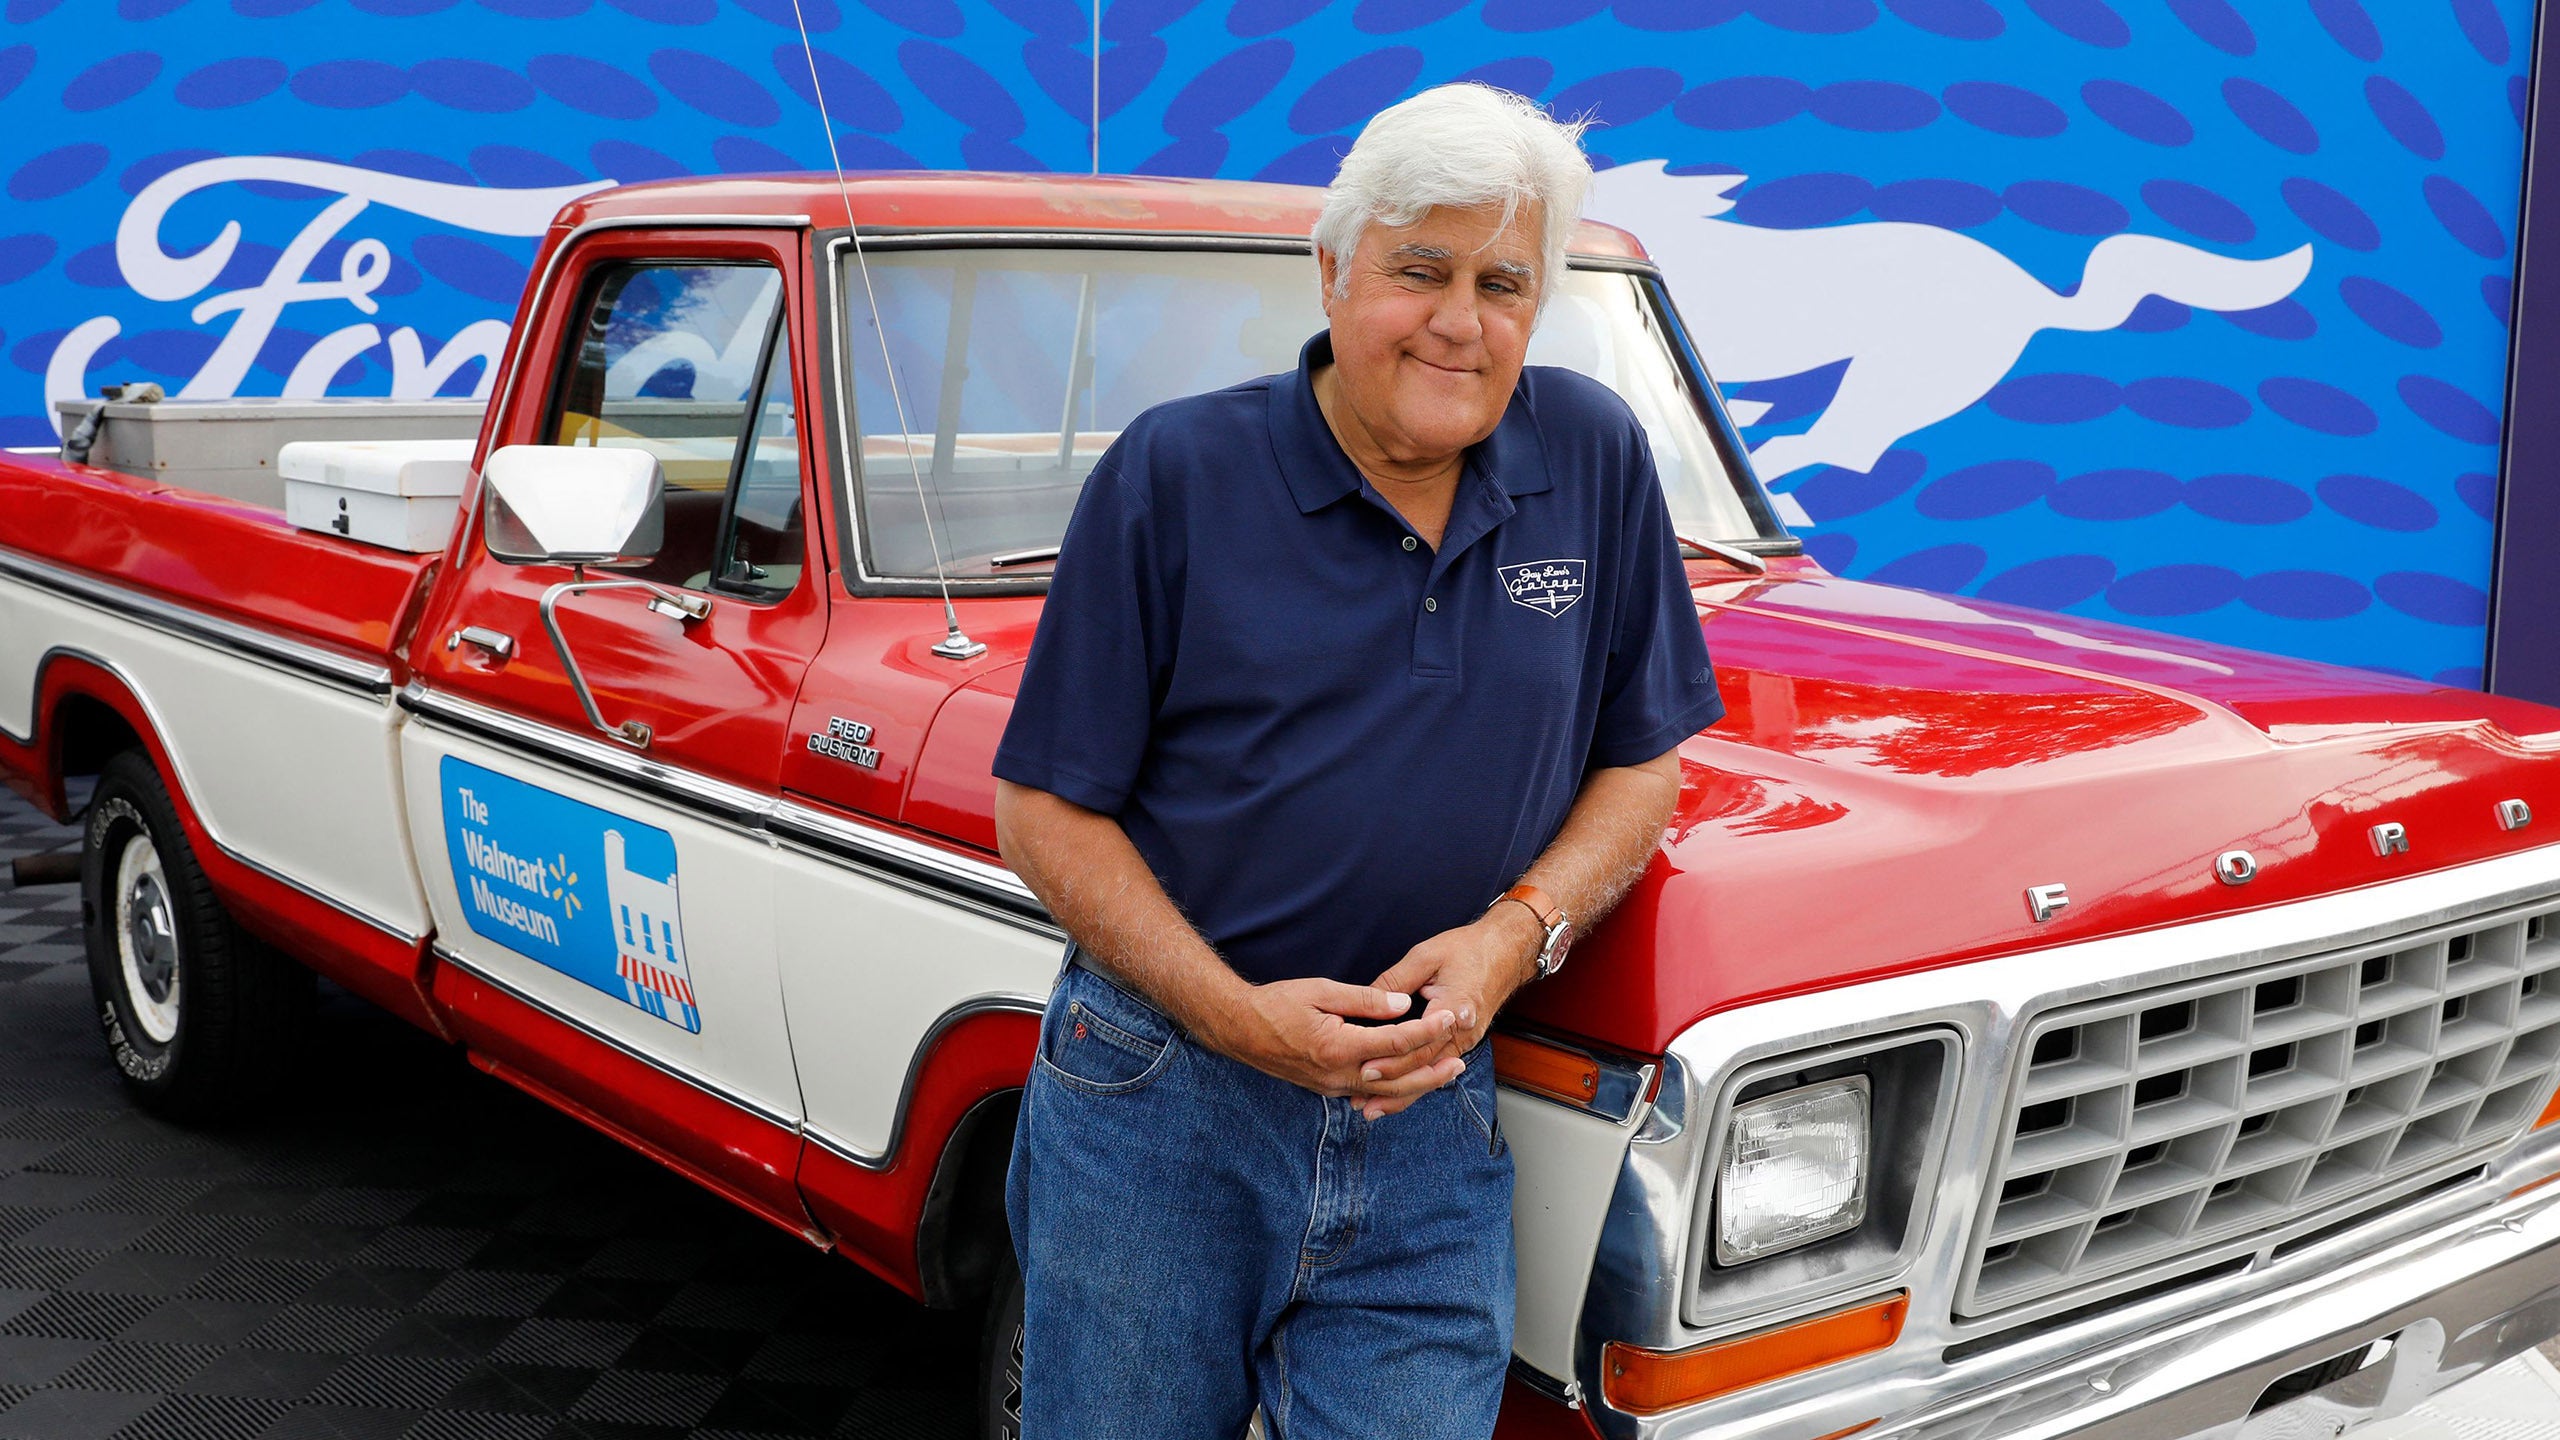 Jay Leno Seriously Burned in Car Fire in His Garage